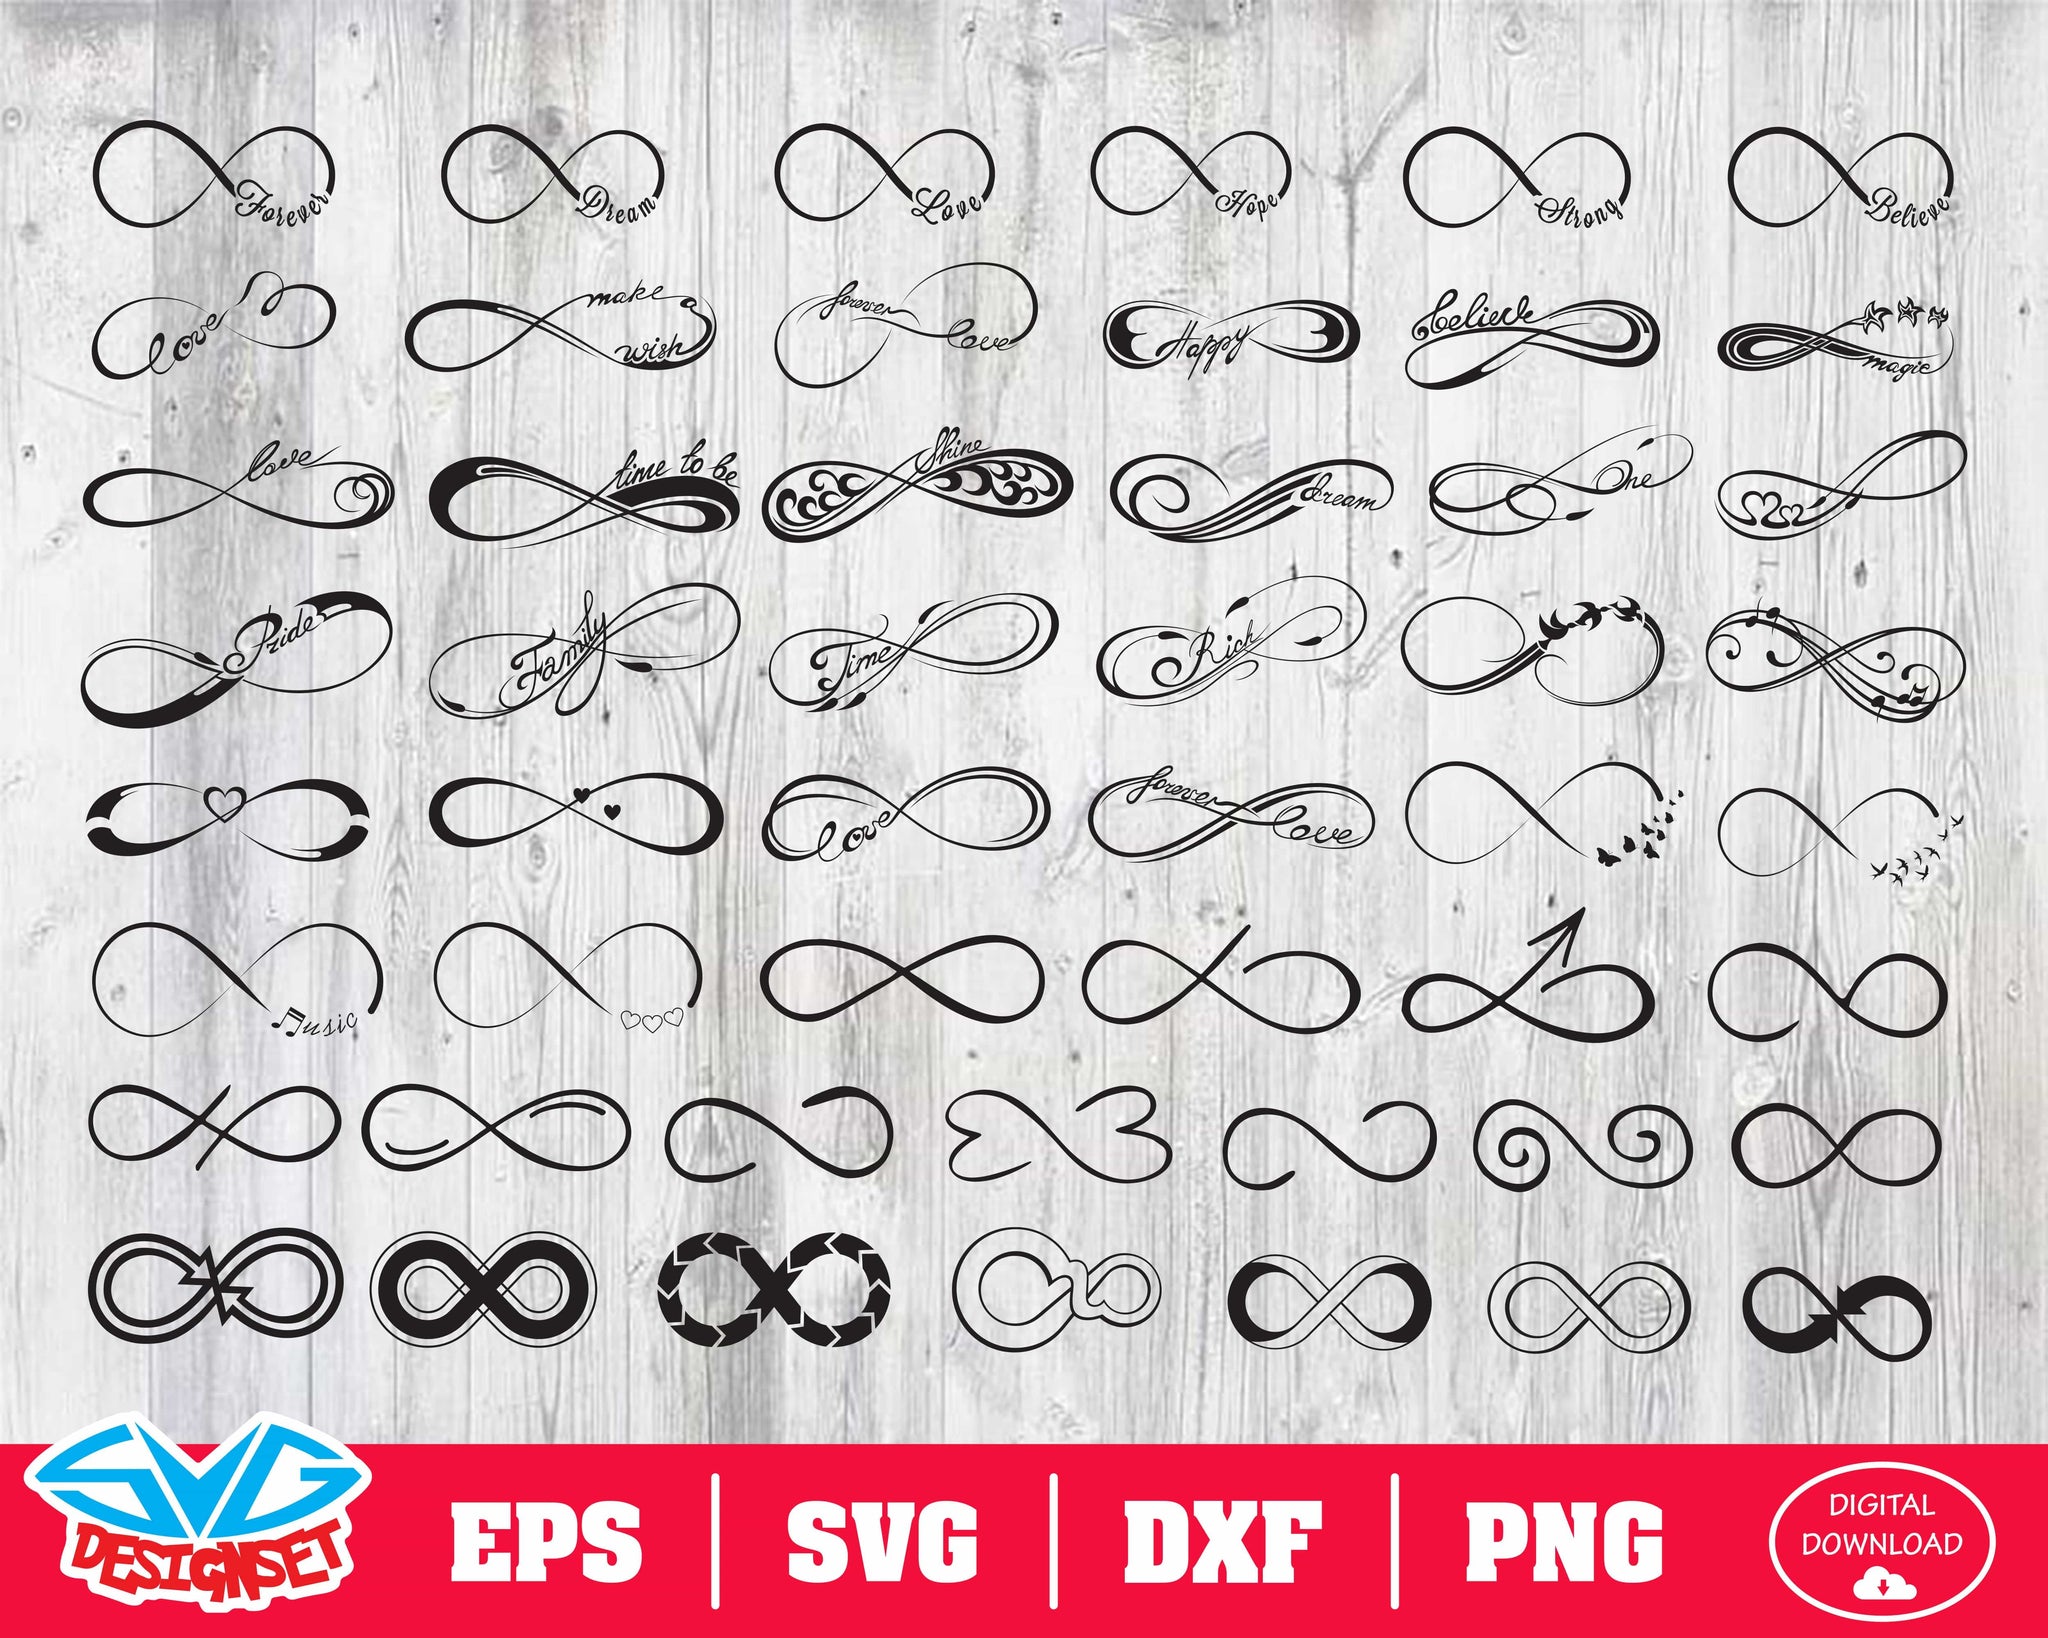 Infinity Svg, Dxf, Eps, Png, Clipart, Silhouette and Cutfiles - SVGDesignSets